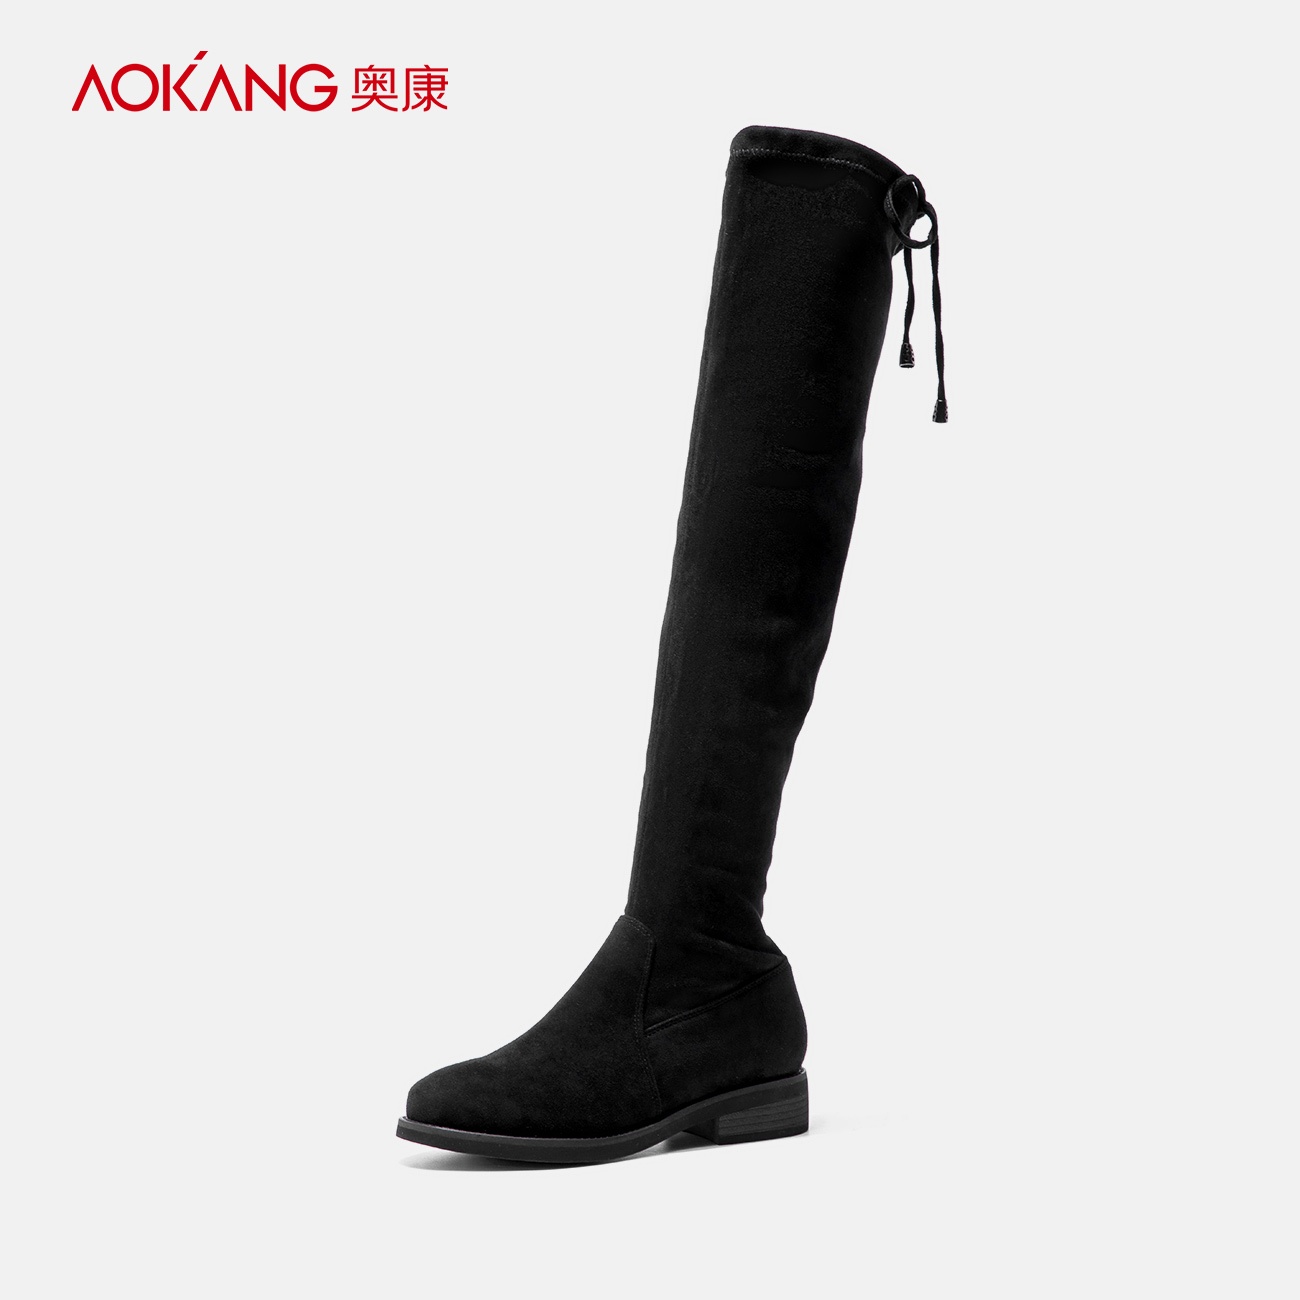 Aokang women's shoes new winter product suede simple solid color women's shoes fashion sleeve knee high boots long tube elastic boots